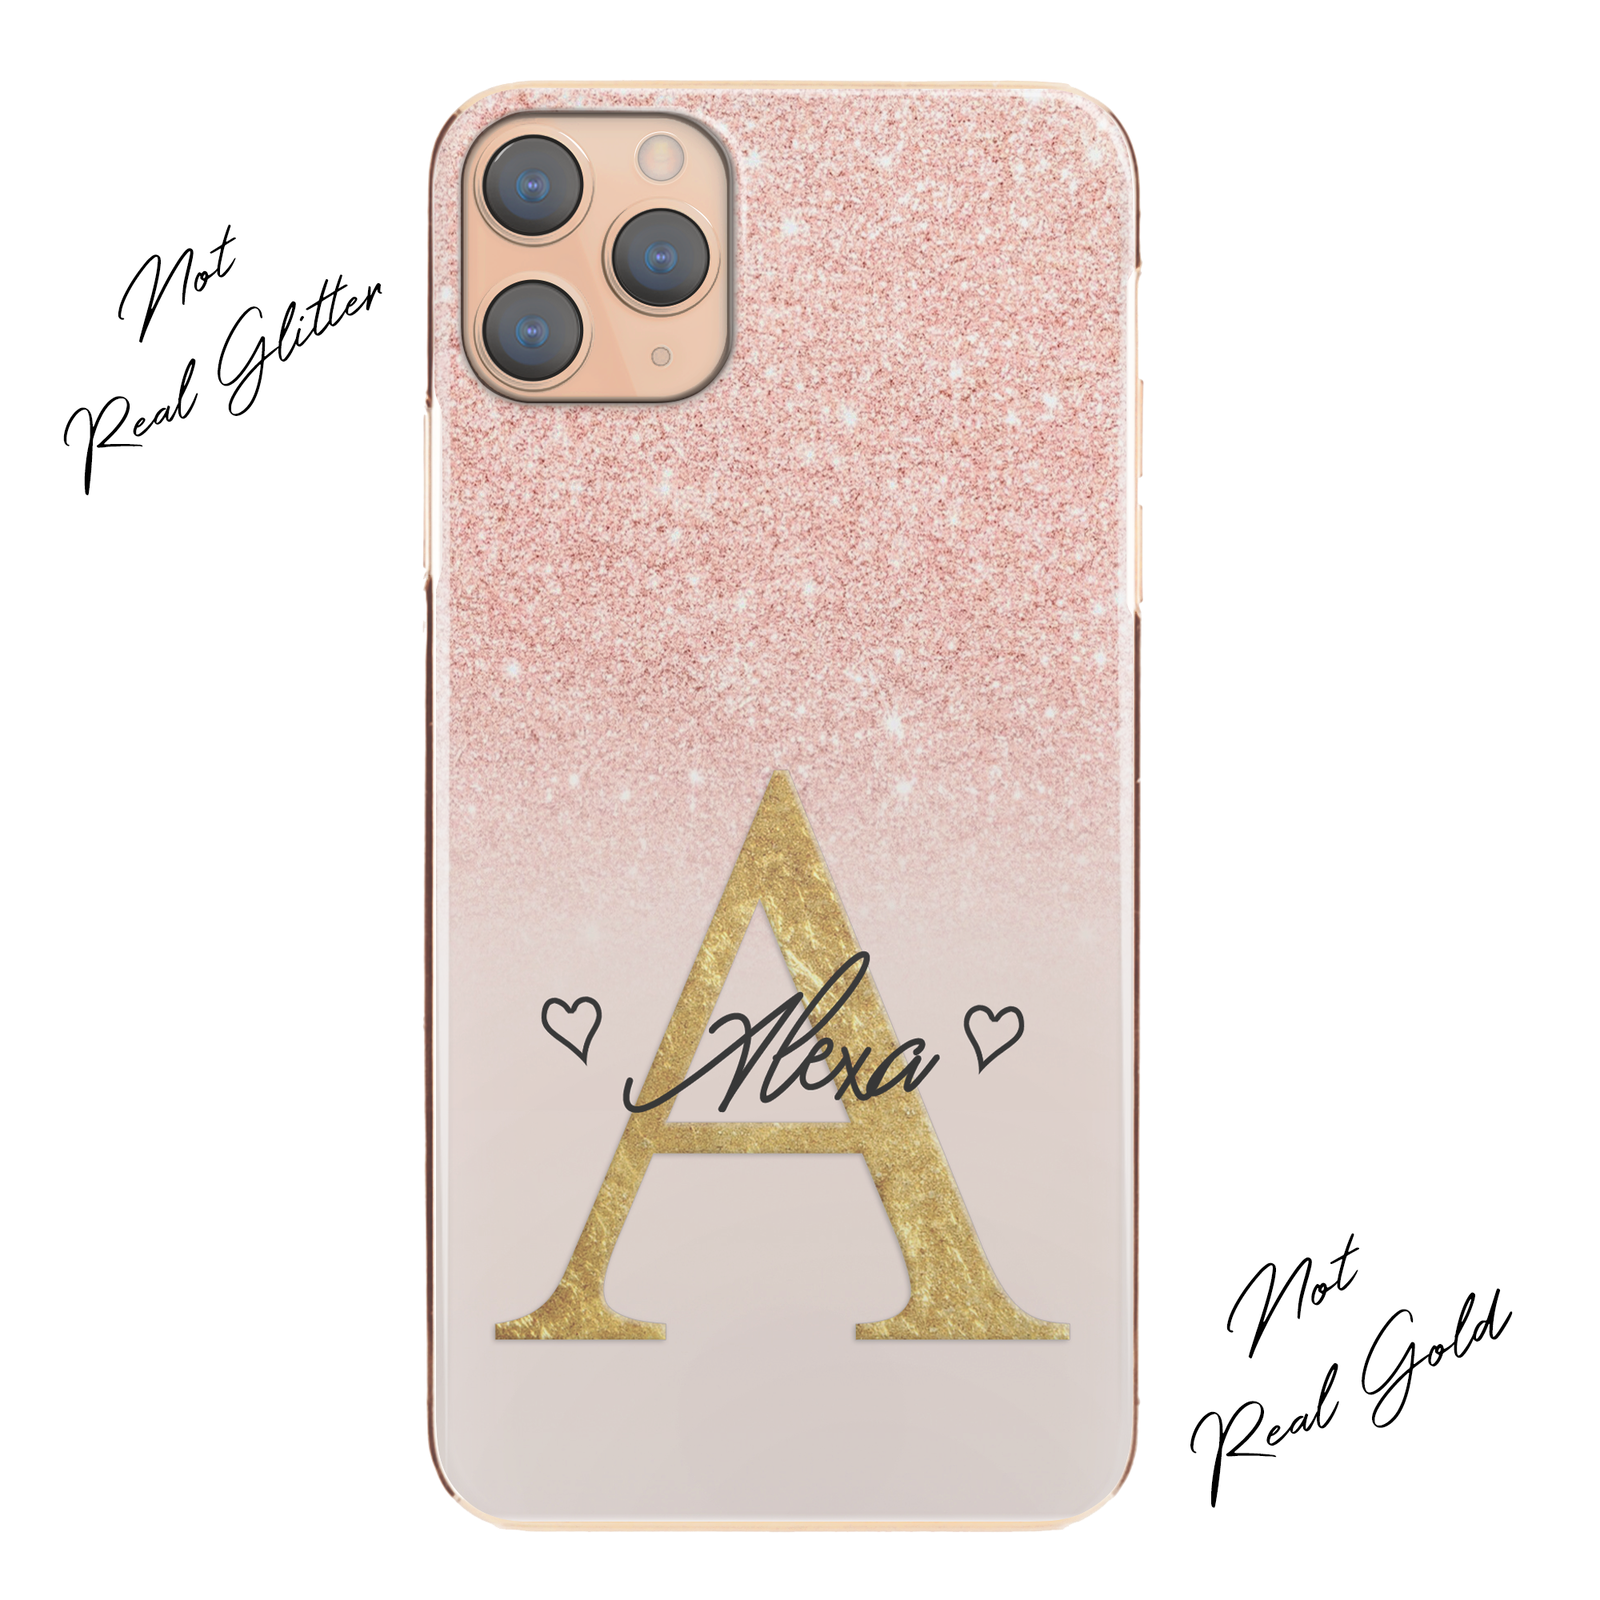 Personalised Phone Case For iPhone 11 Pro, Initial Grey/Pink Marble Hard Cover